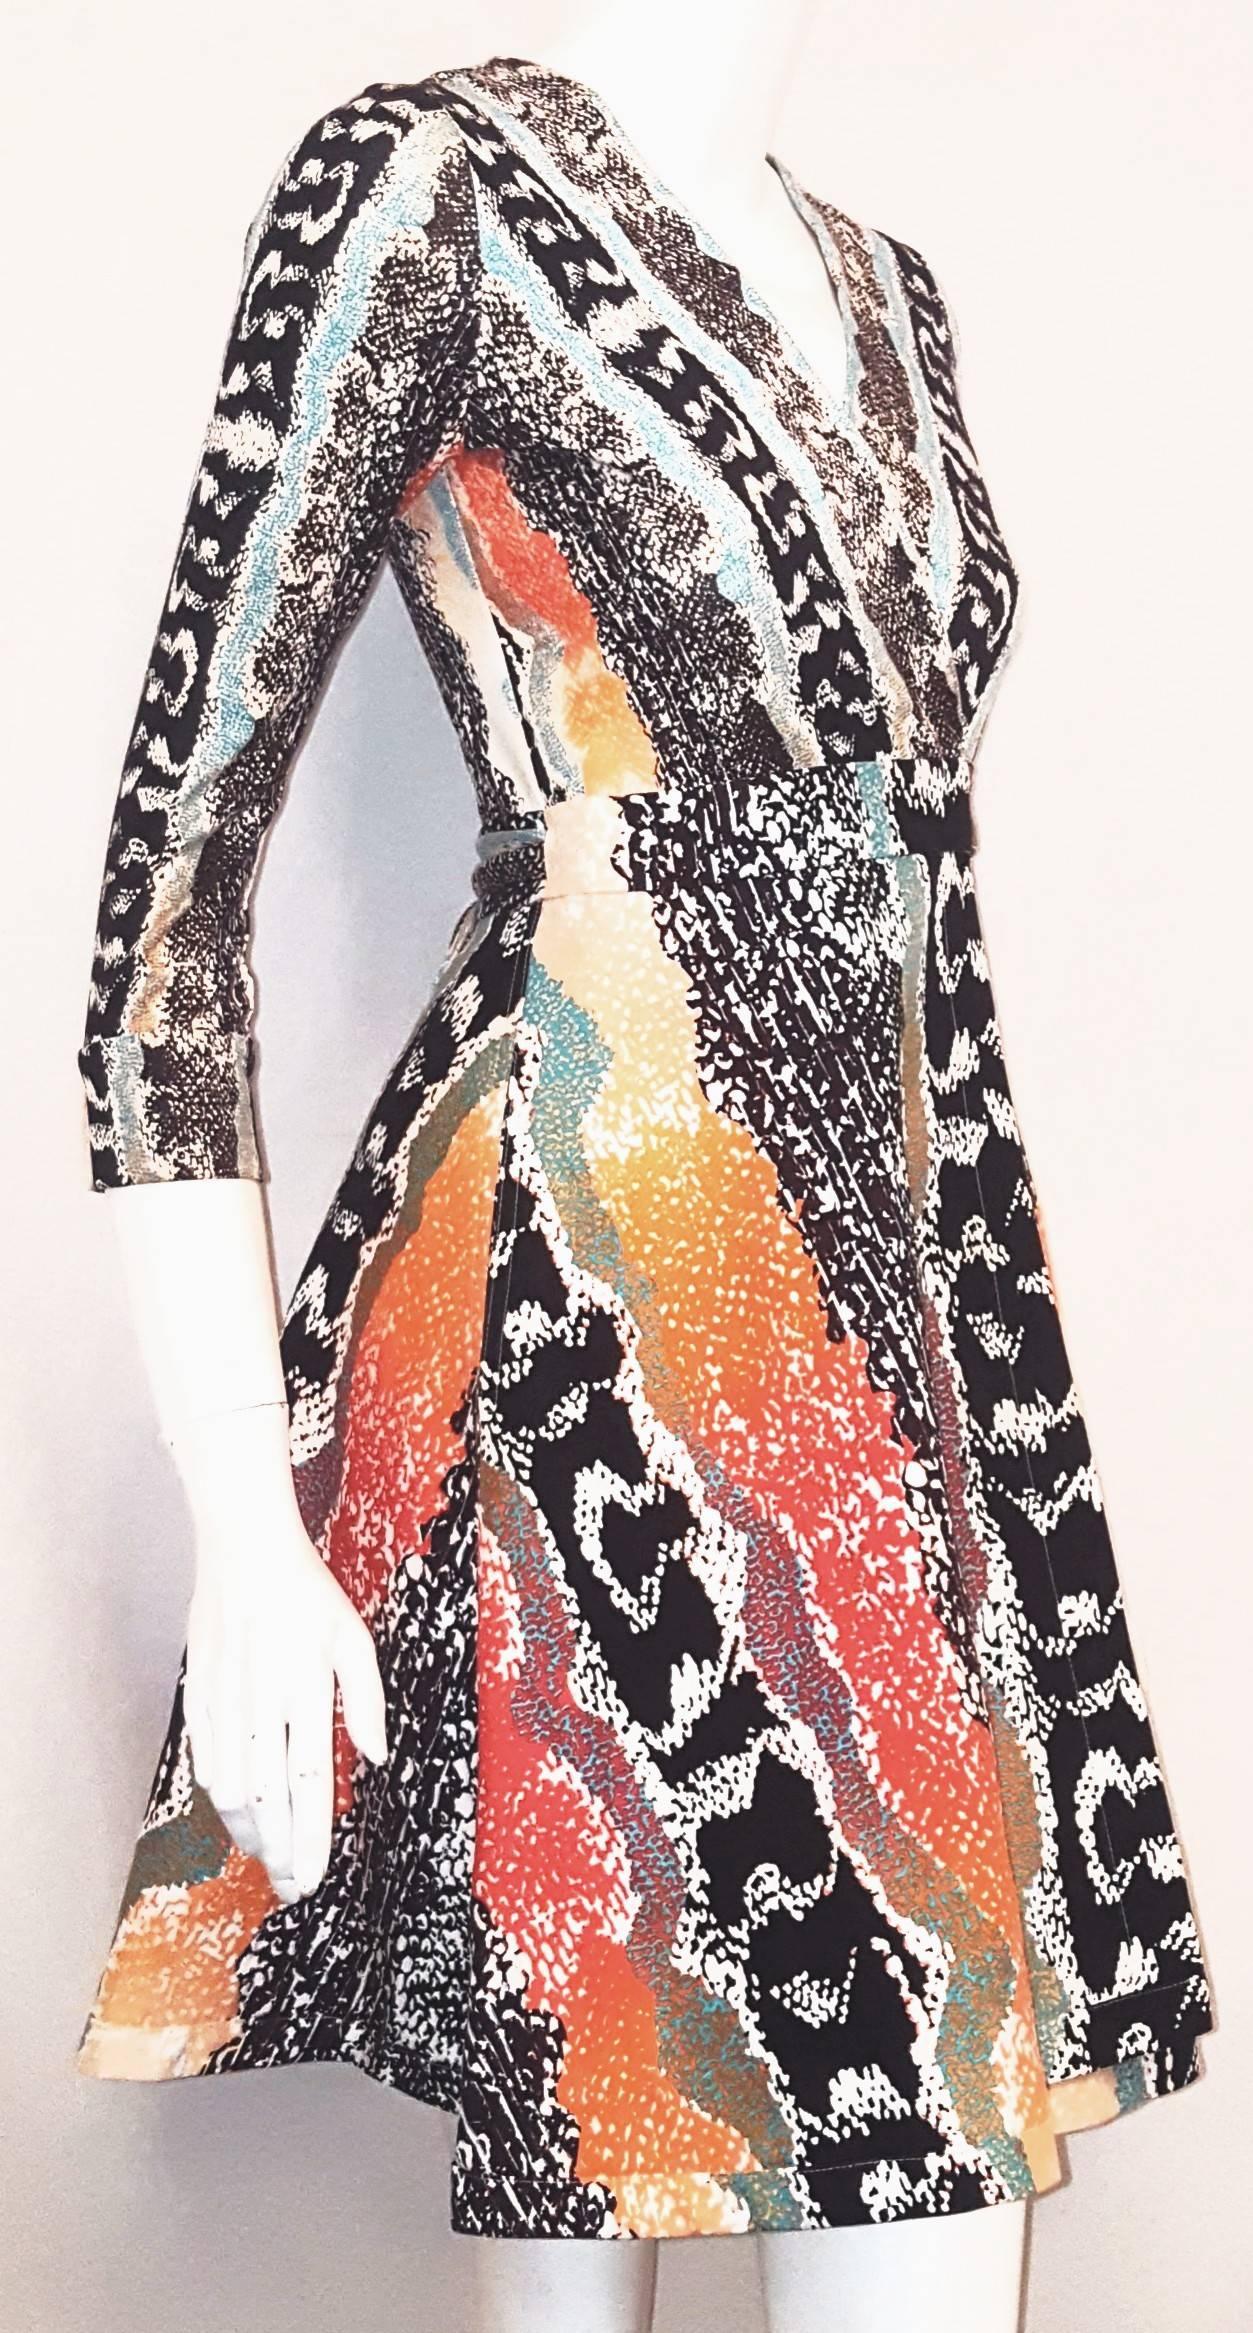 Diane von Furstenberg classic wrap dress in bright orange, turquoise, brown, black, red and white abstract print dress would be a constant complement to any wardrobe for the summer season, practical and easy to accessorize.  This dress contains 2